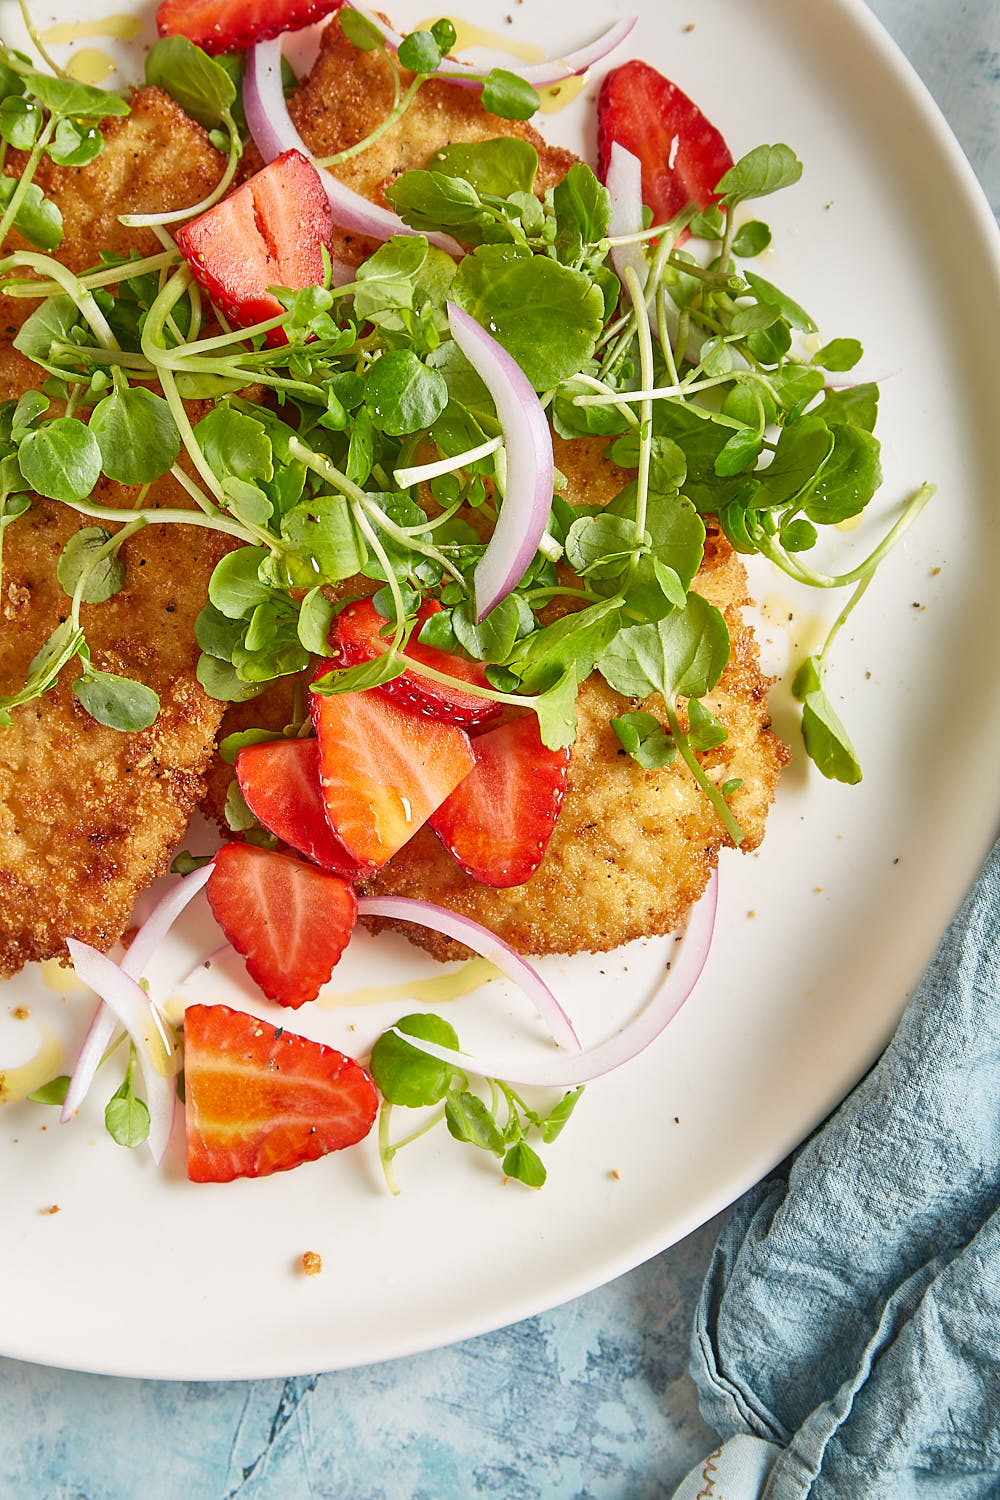 Breaded chicken cutlet with strawberry salad